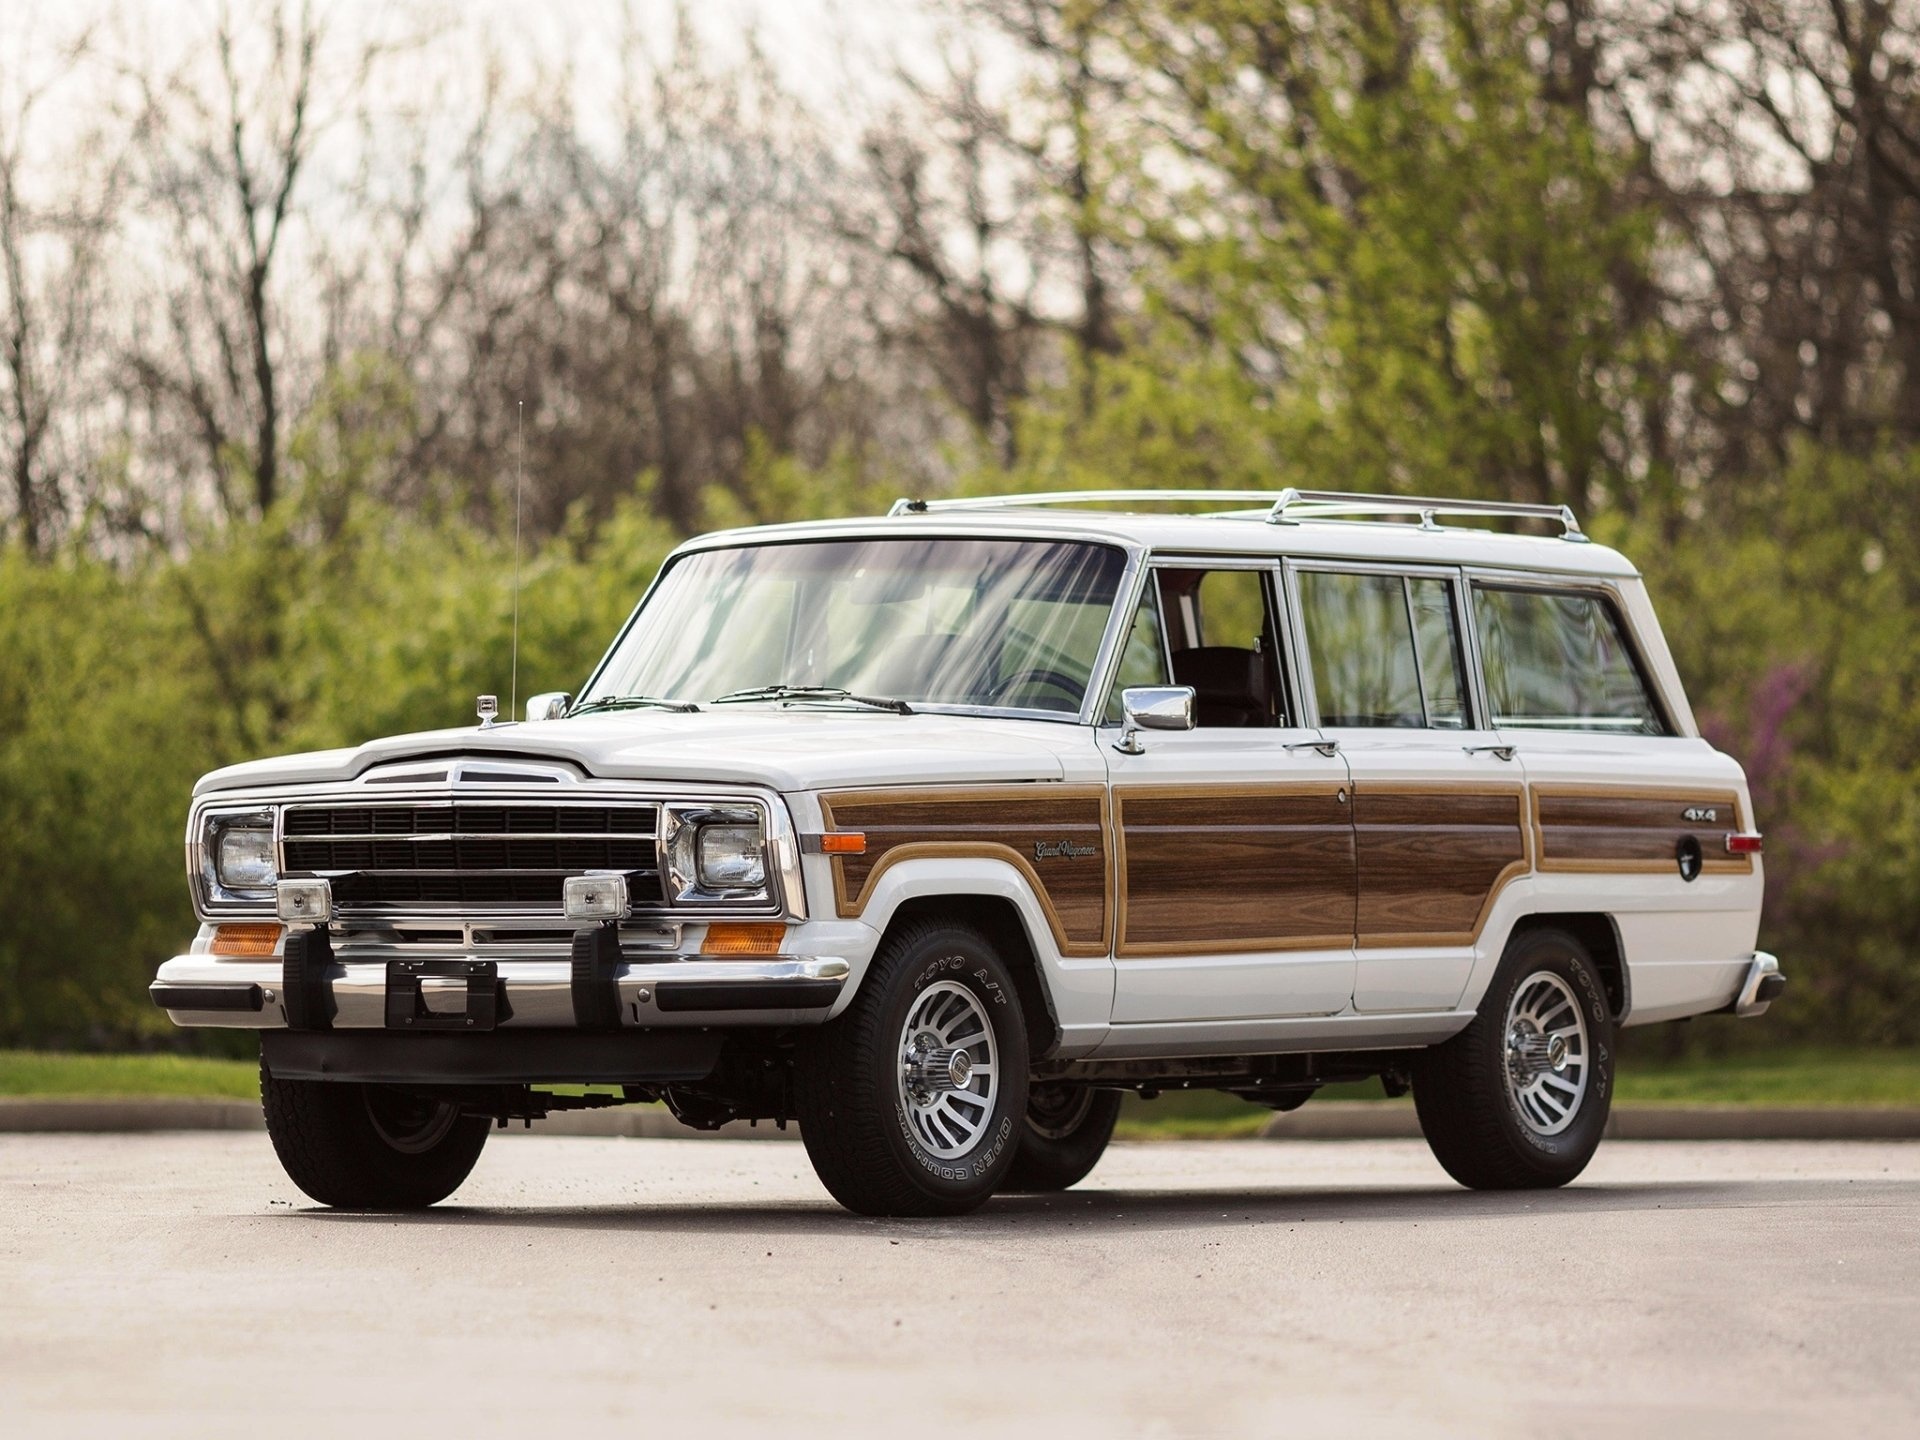 Jeep Grand Wagoneer wallpapers, High-quality images, SUV pixel, HD, 1920x1440 HD Desktop